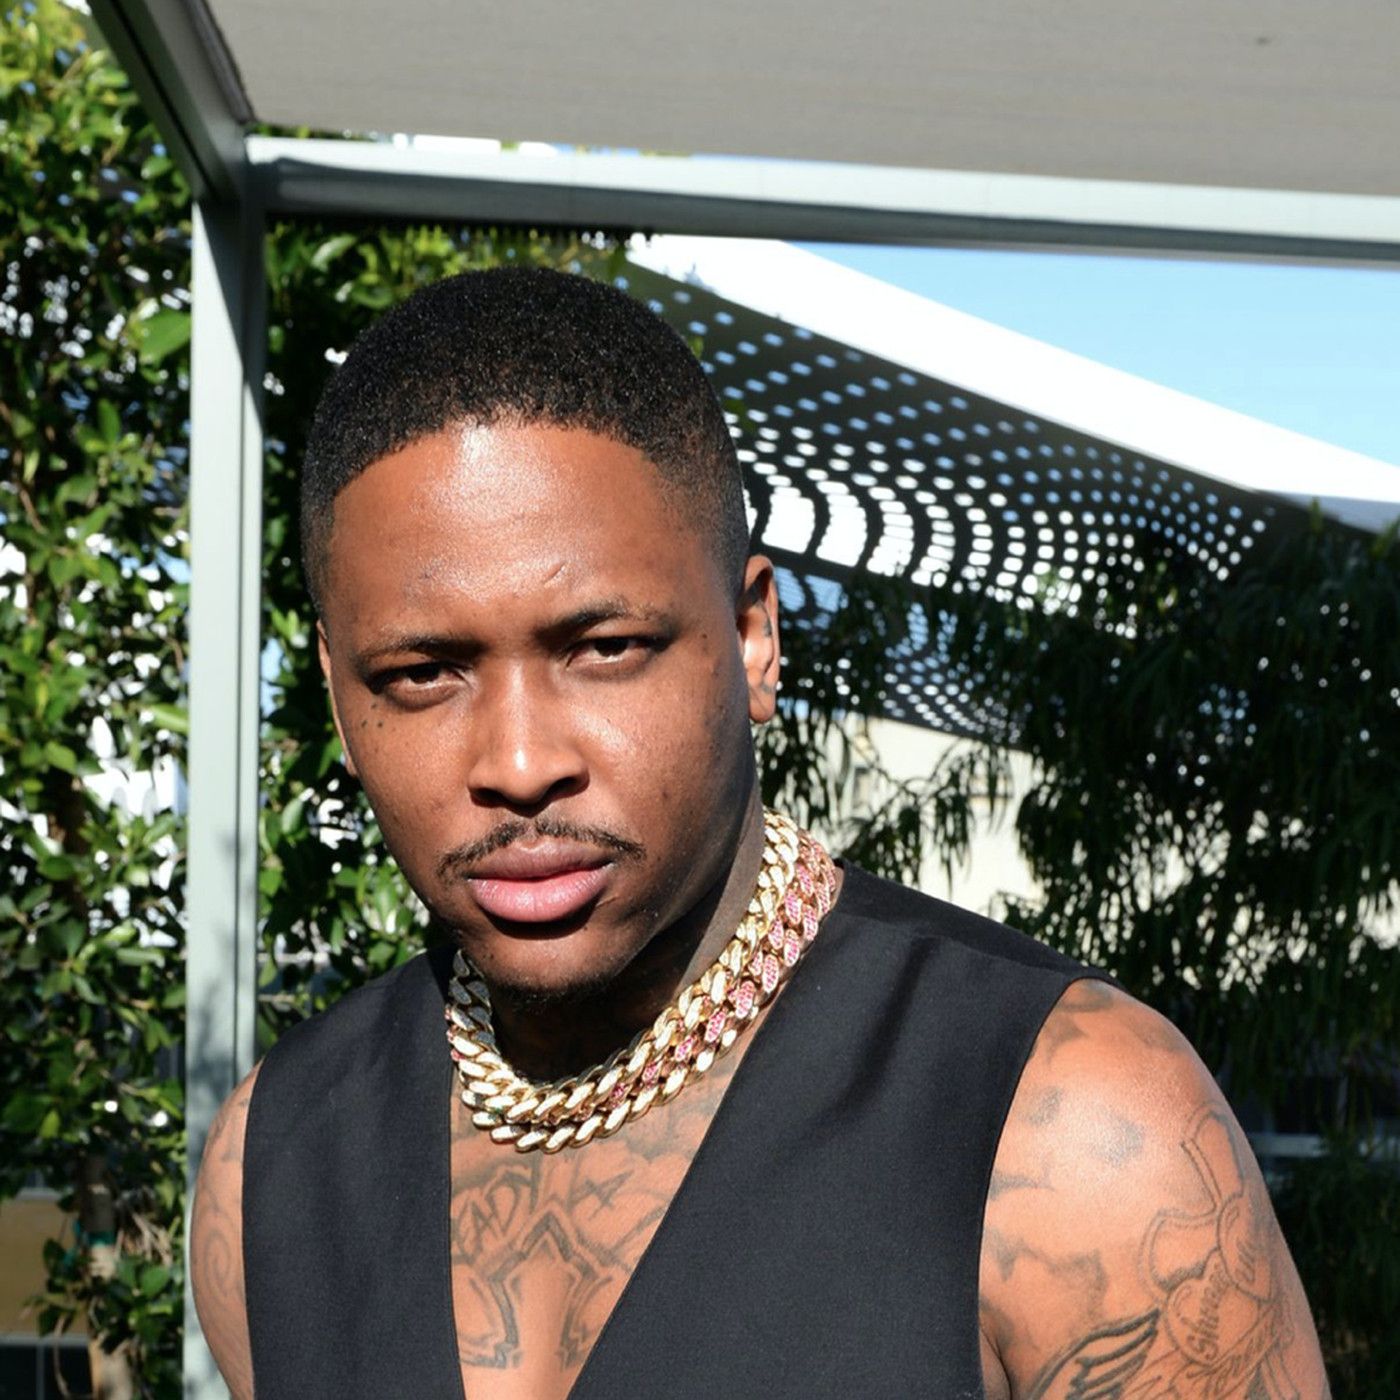 YG reportedly lost $400k worth of jewelry in robbery